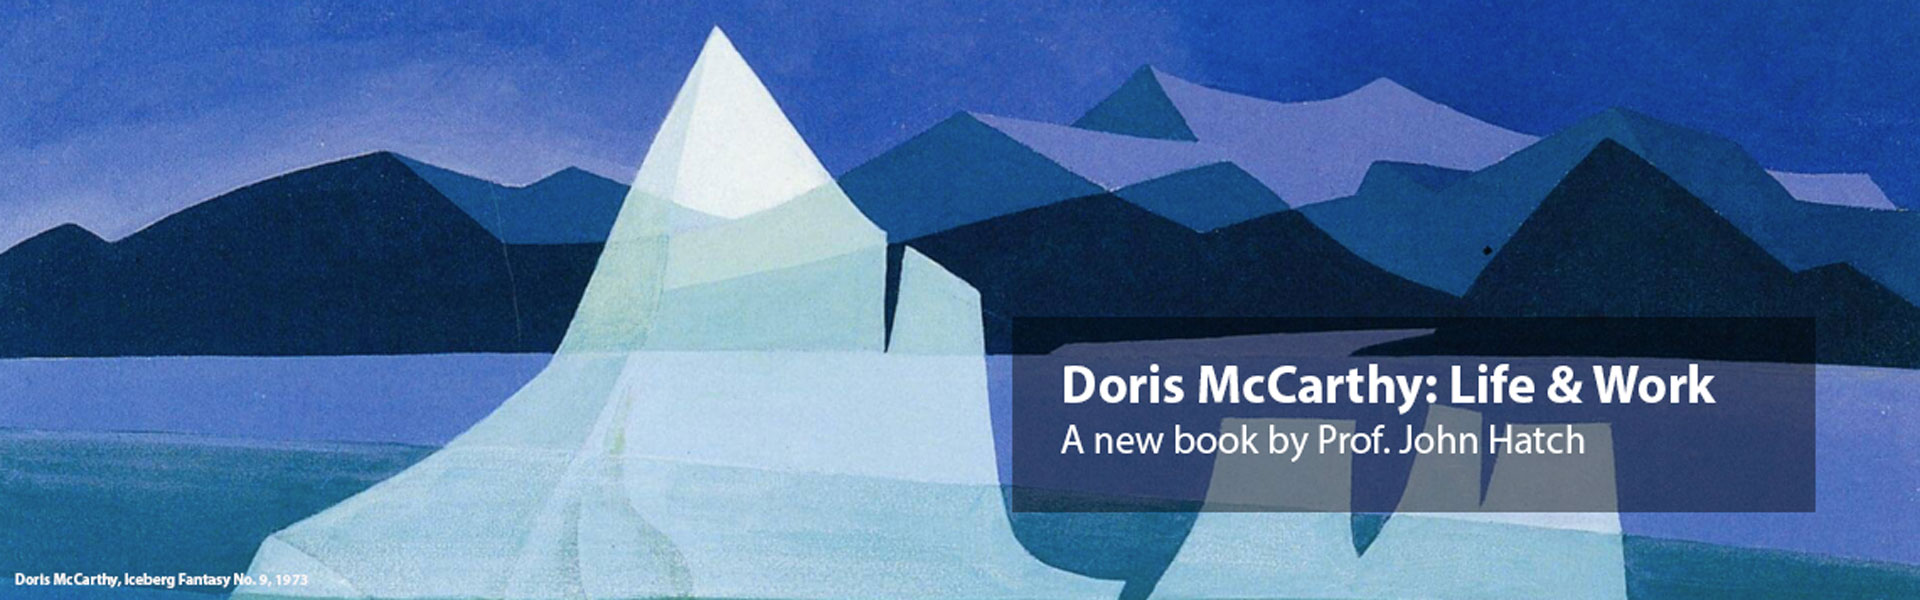 John Hatch publishes new book titled Doris McCarthy life and work